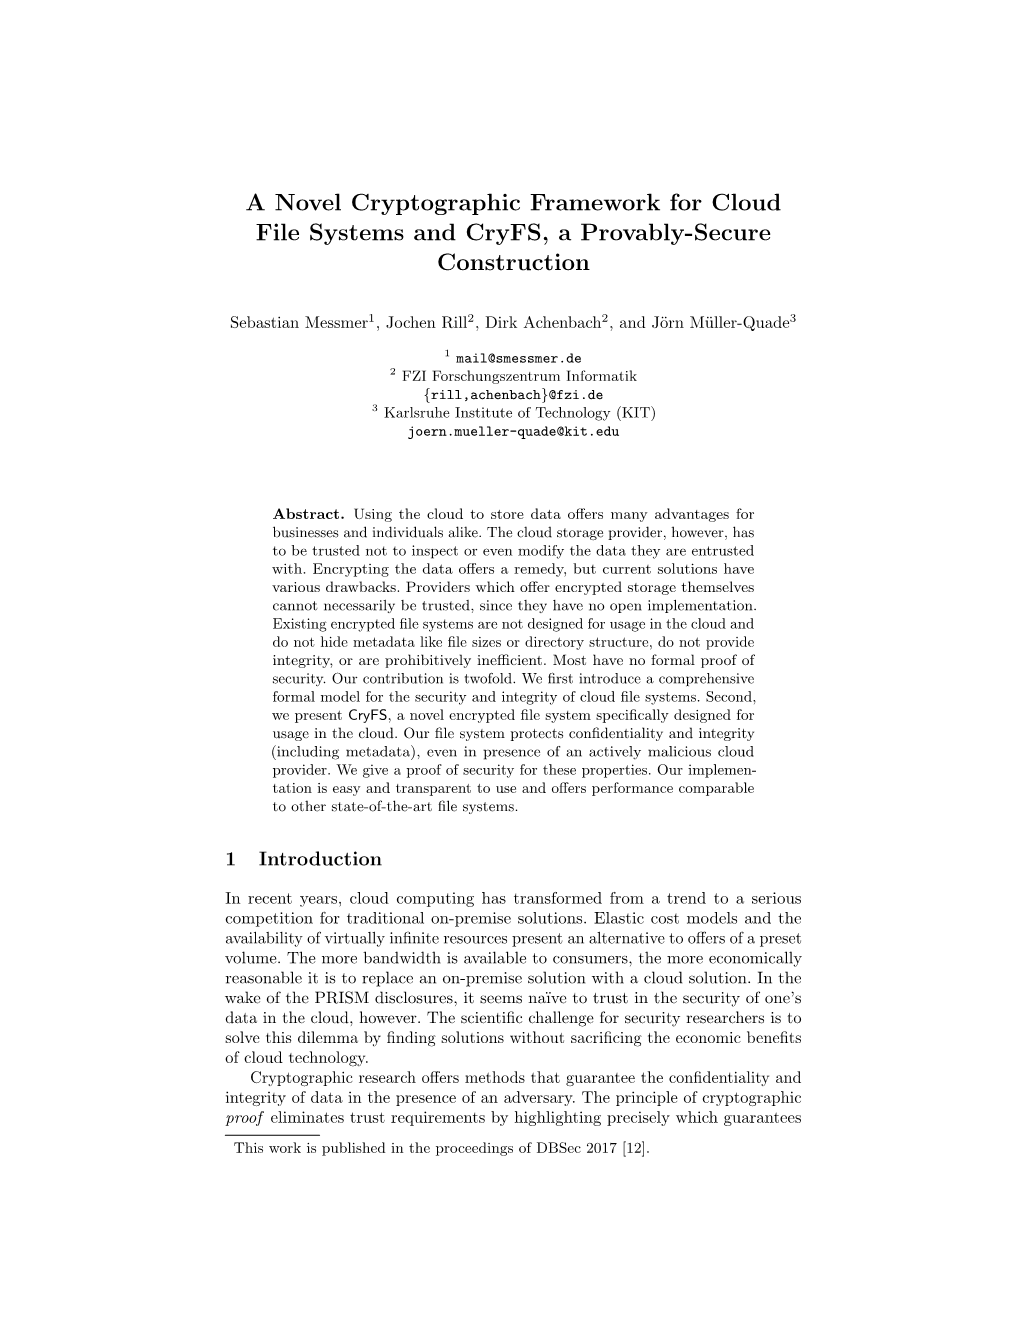 A Novel Cryptographic Framework for Cloud File Systems and Cryfs, a Provably-Secure Construction